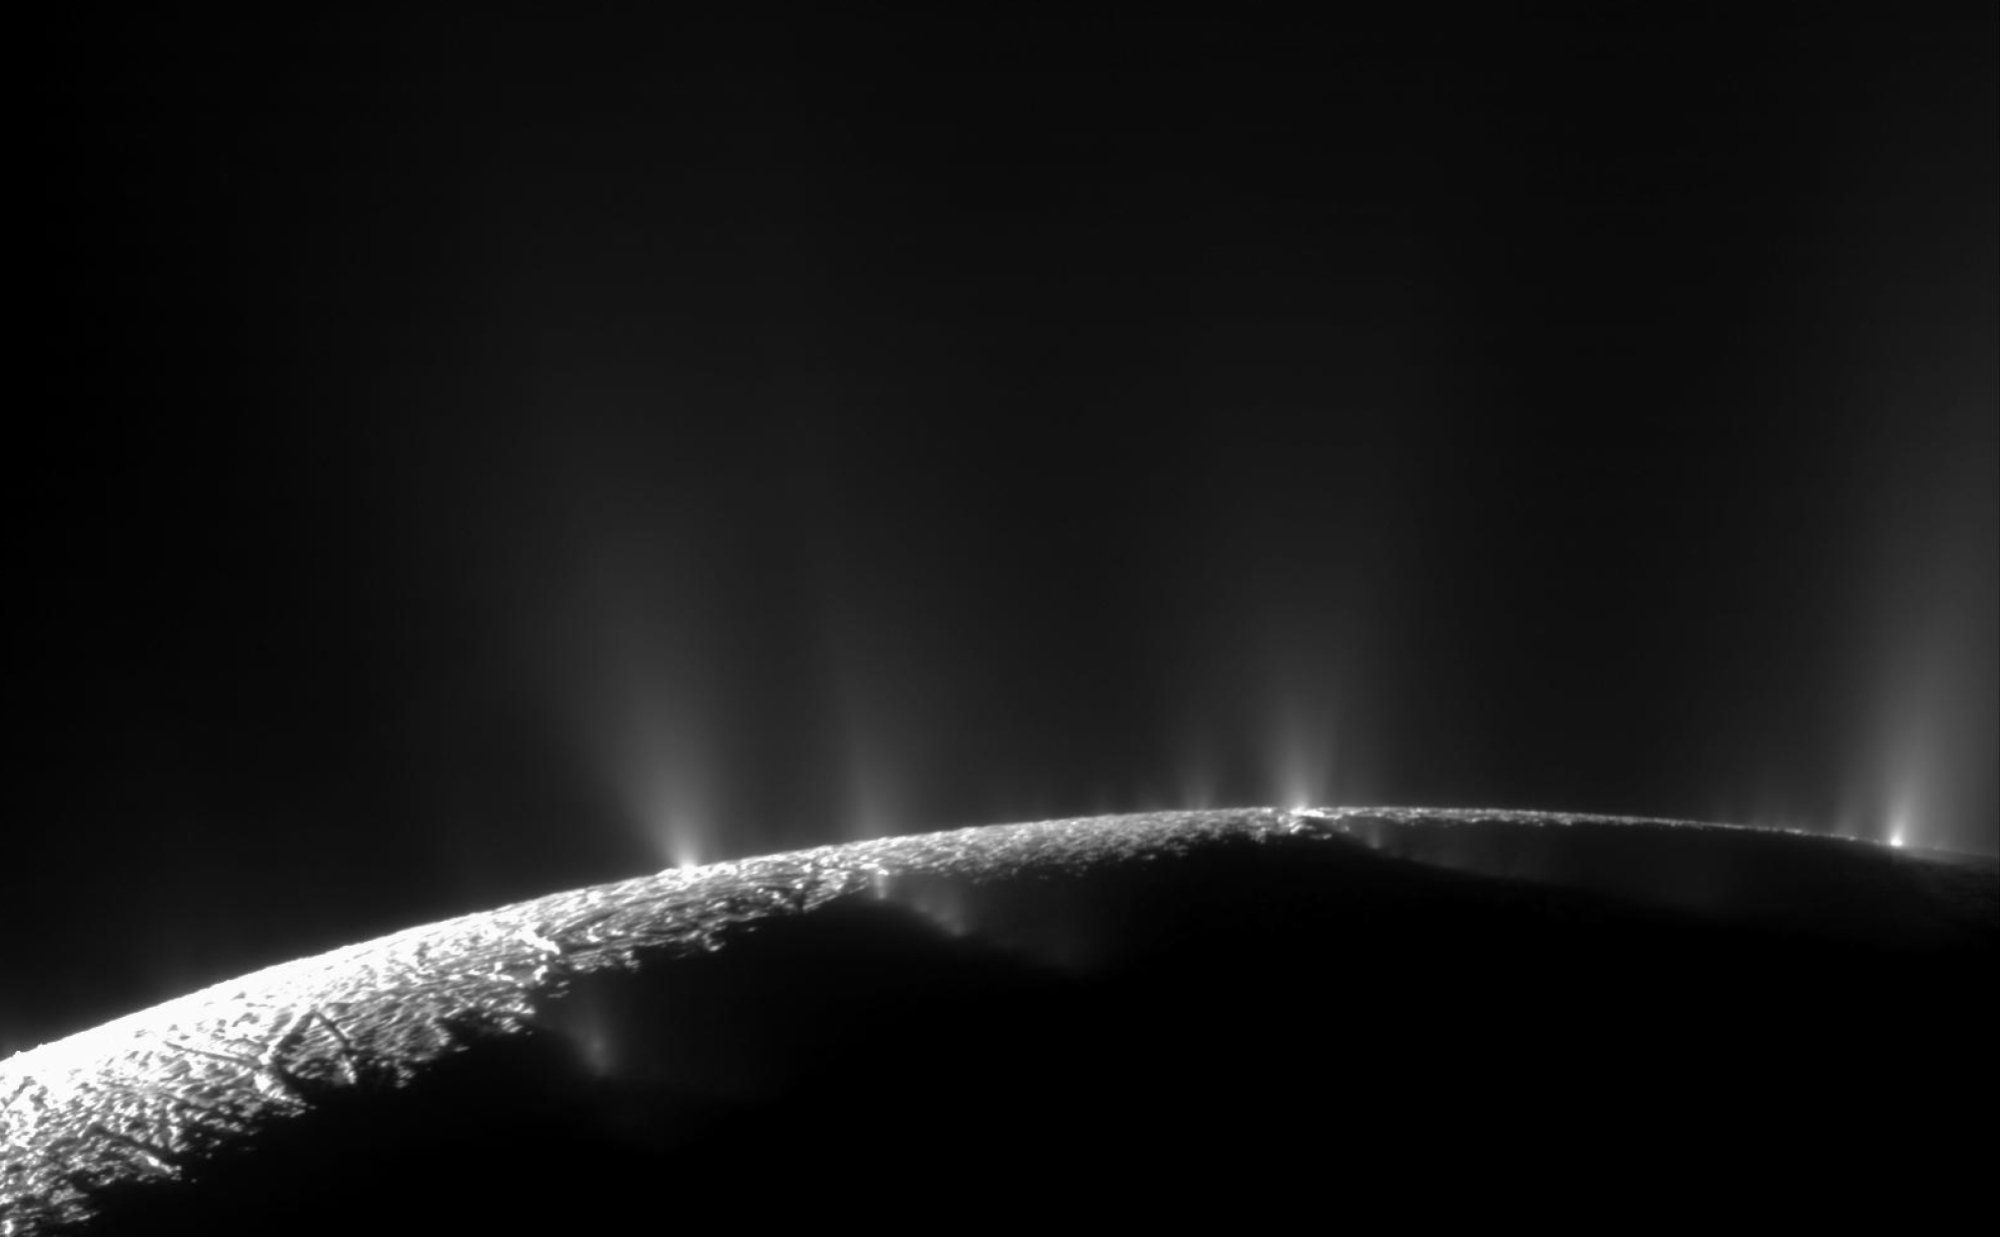 plumes shooting our of the moon Enceladus